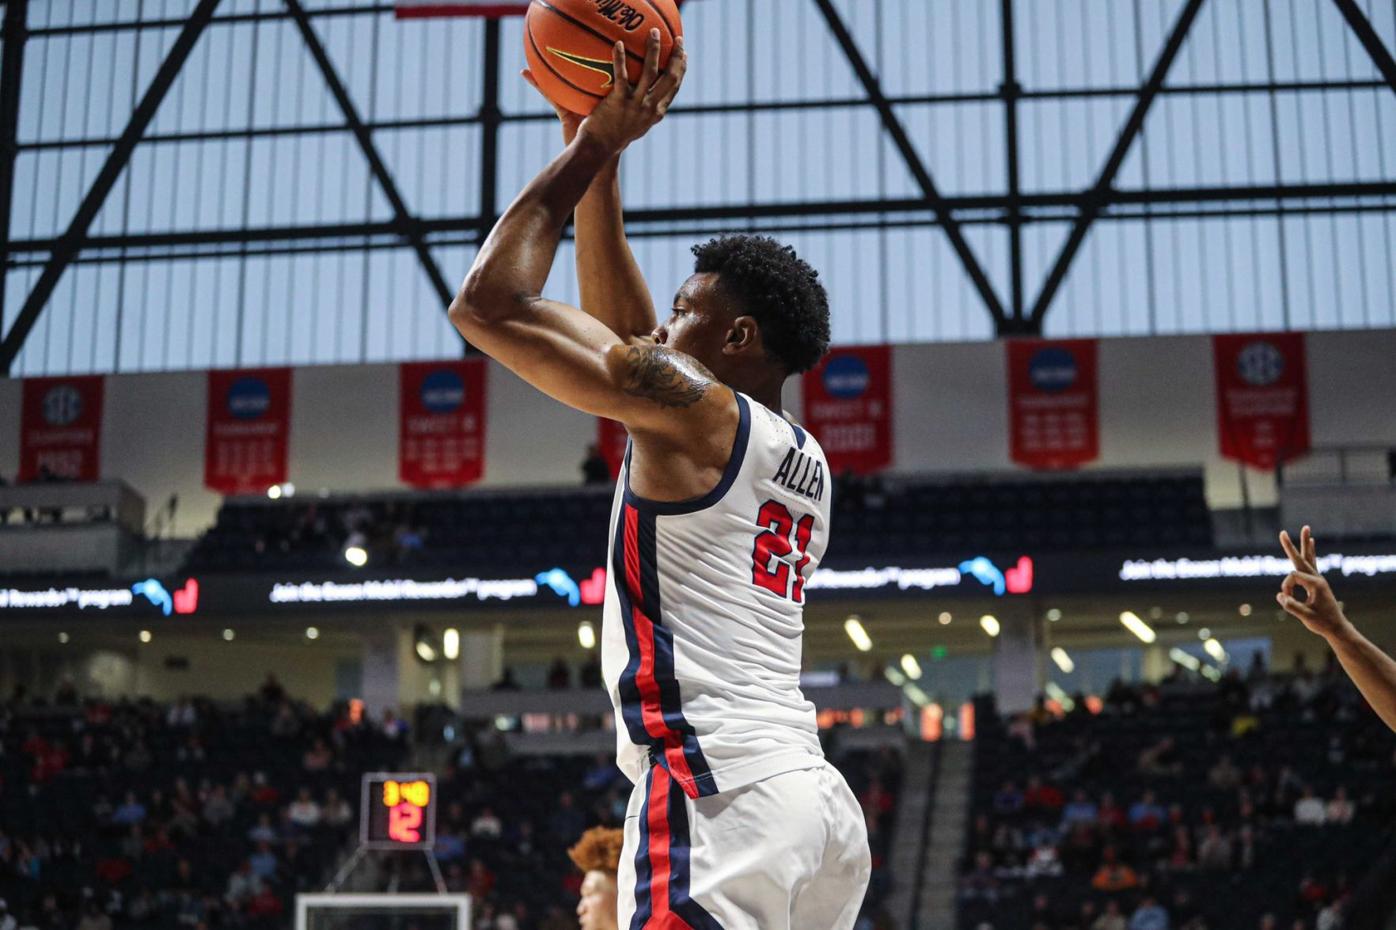 Ole Miss basketball upsets No. 18 Memphis, 67-63, to remain